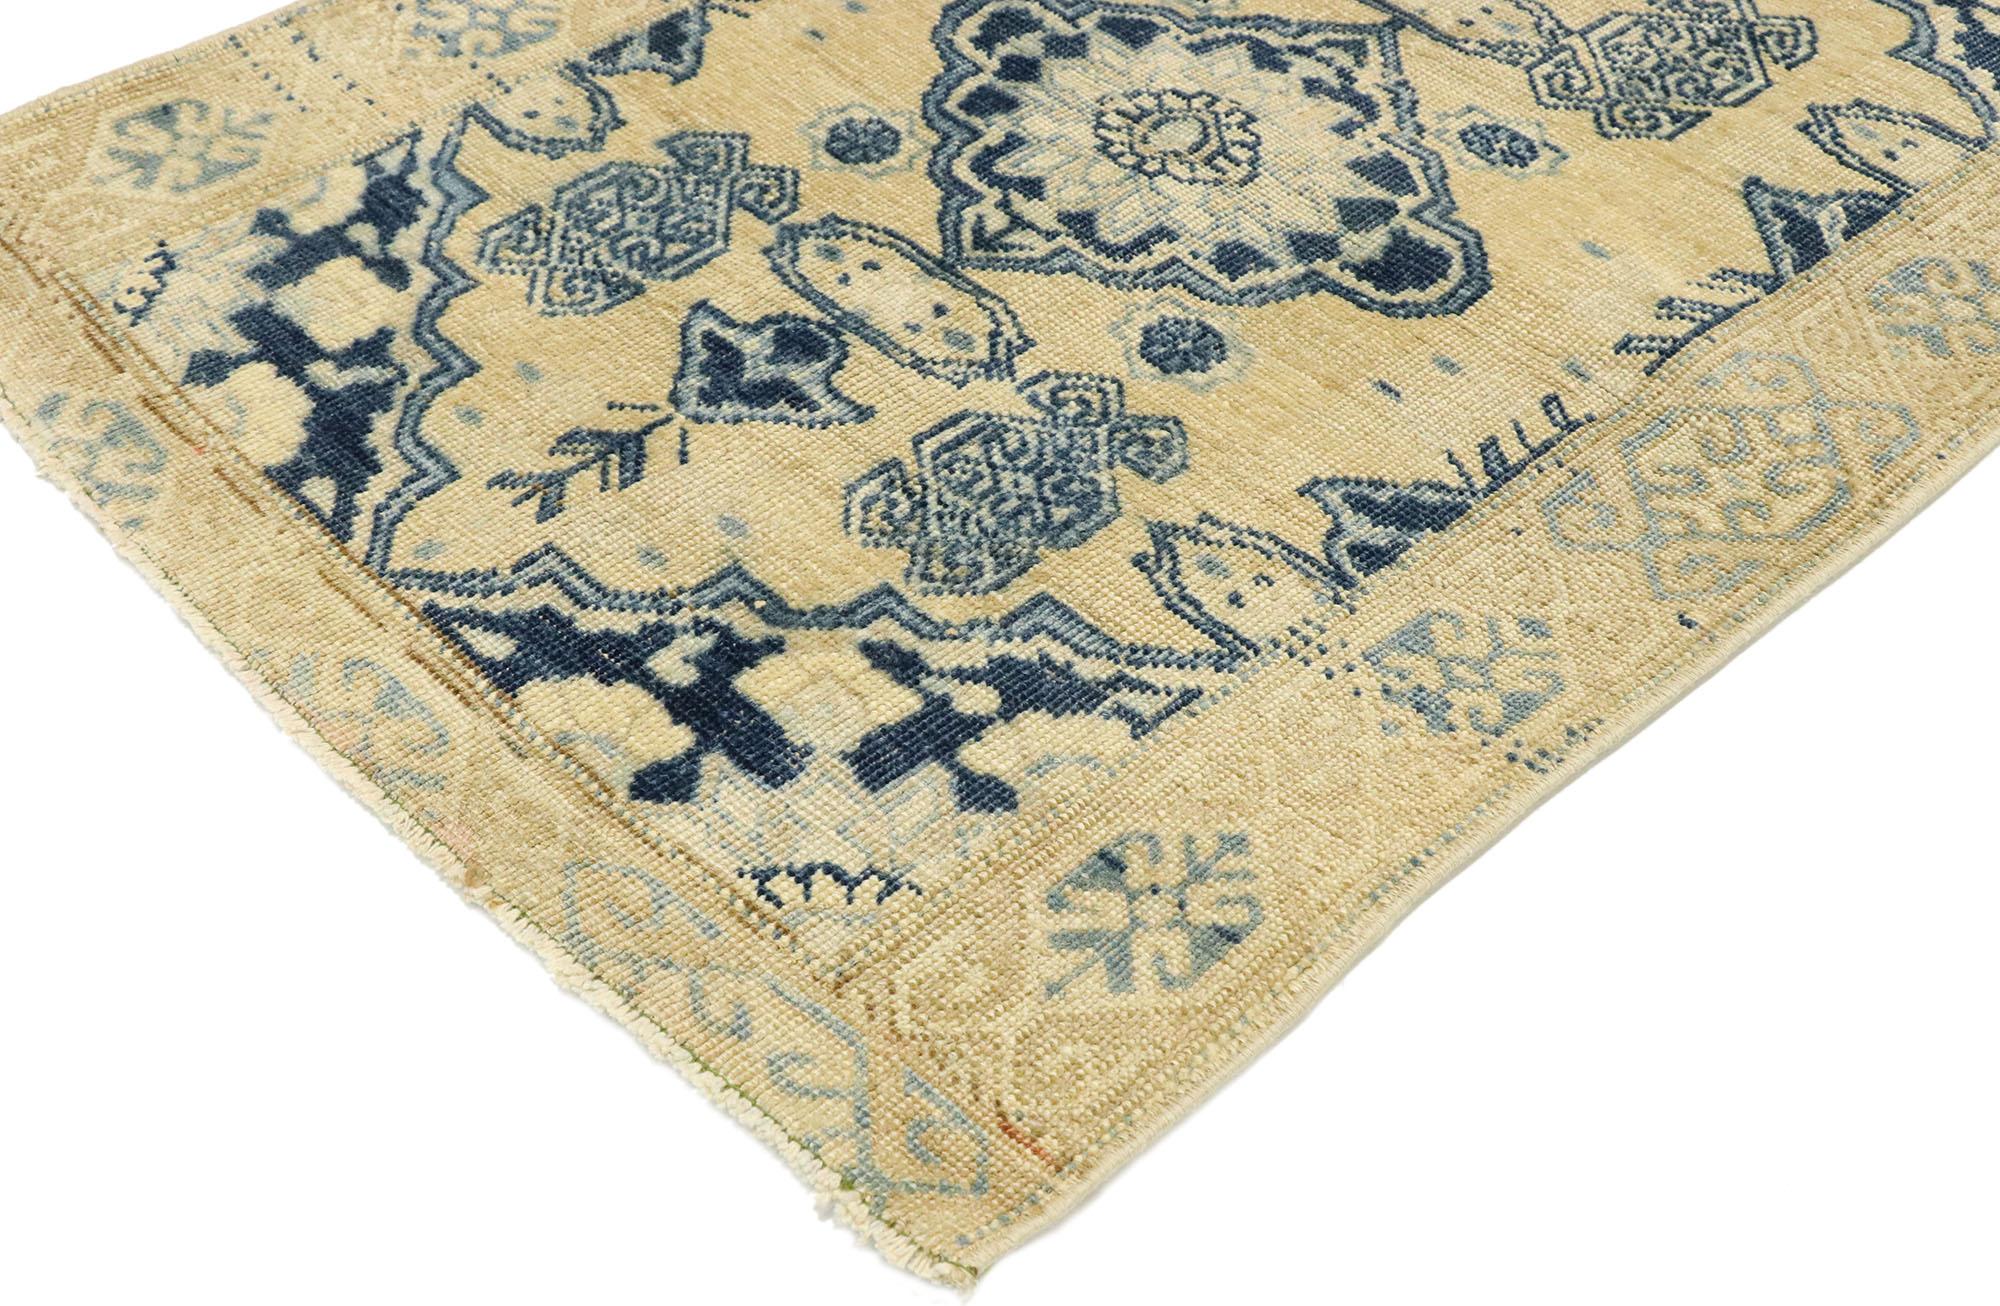 53041 vintage Turkish Oushak rug Warm Mediterranean Coastal style. Effortless beauty and simplicity meet warm beiges and deep blues with a subtle Mediterranean style in this hand knotted wool vintage Turkish Oushak rug. The ecru-tan antique washed